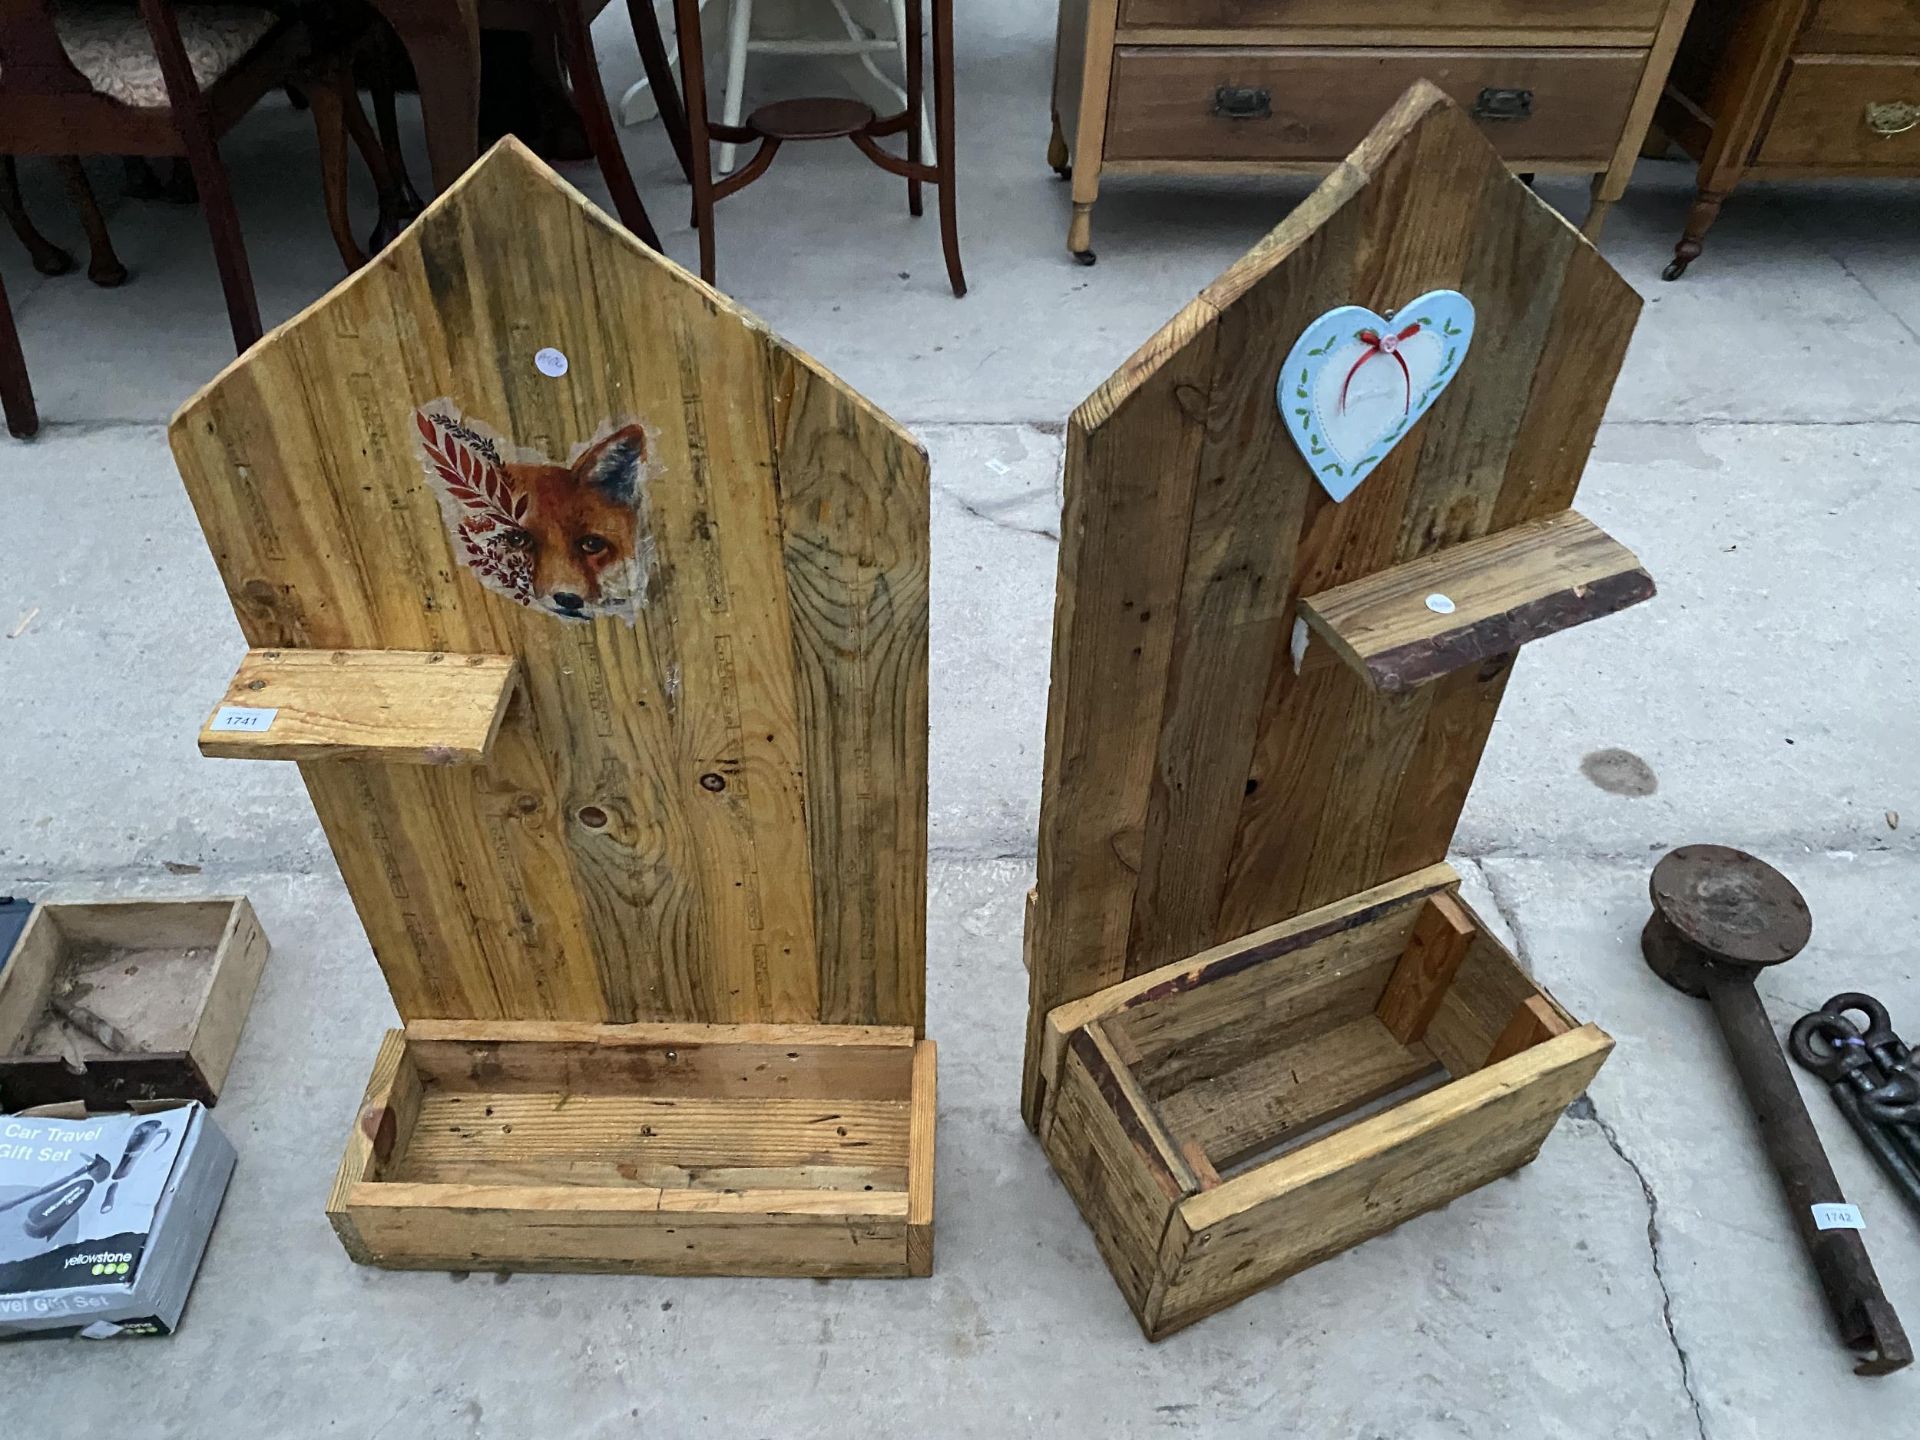 TWO WOODEN PLANTER TROUGHS WITH BACKBOARD AND SHELF